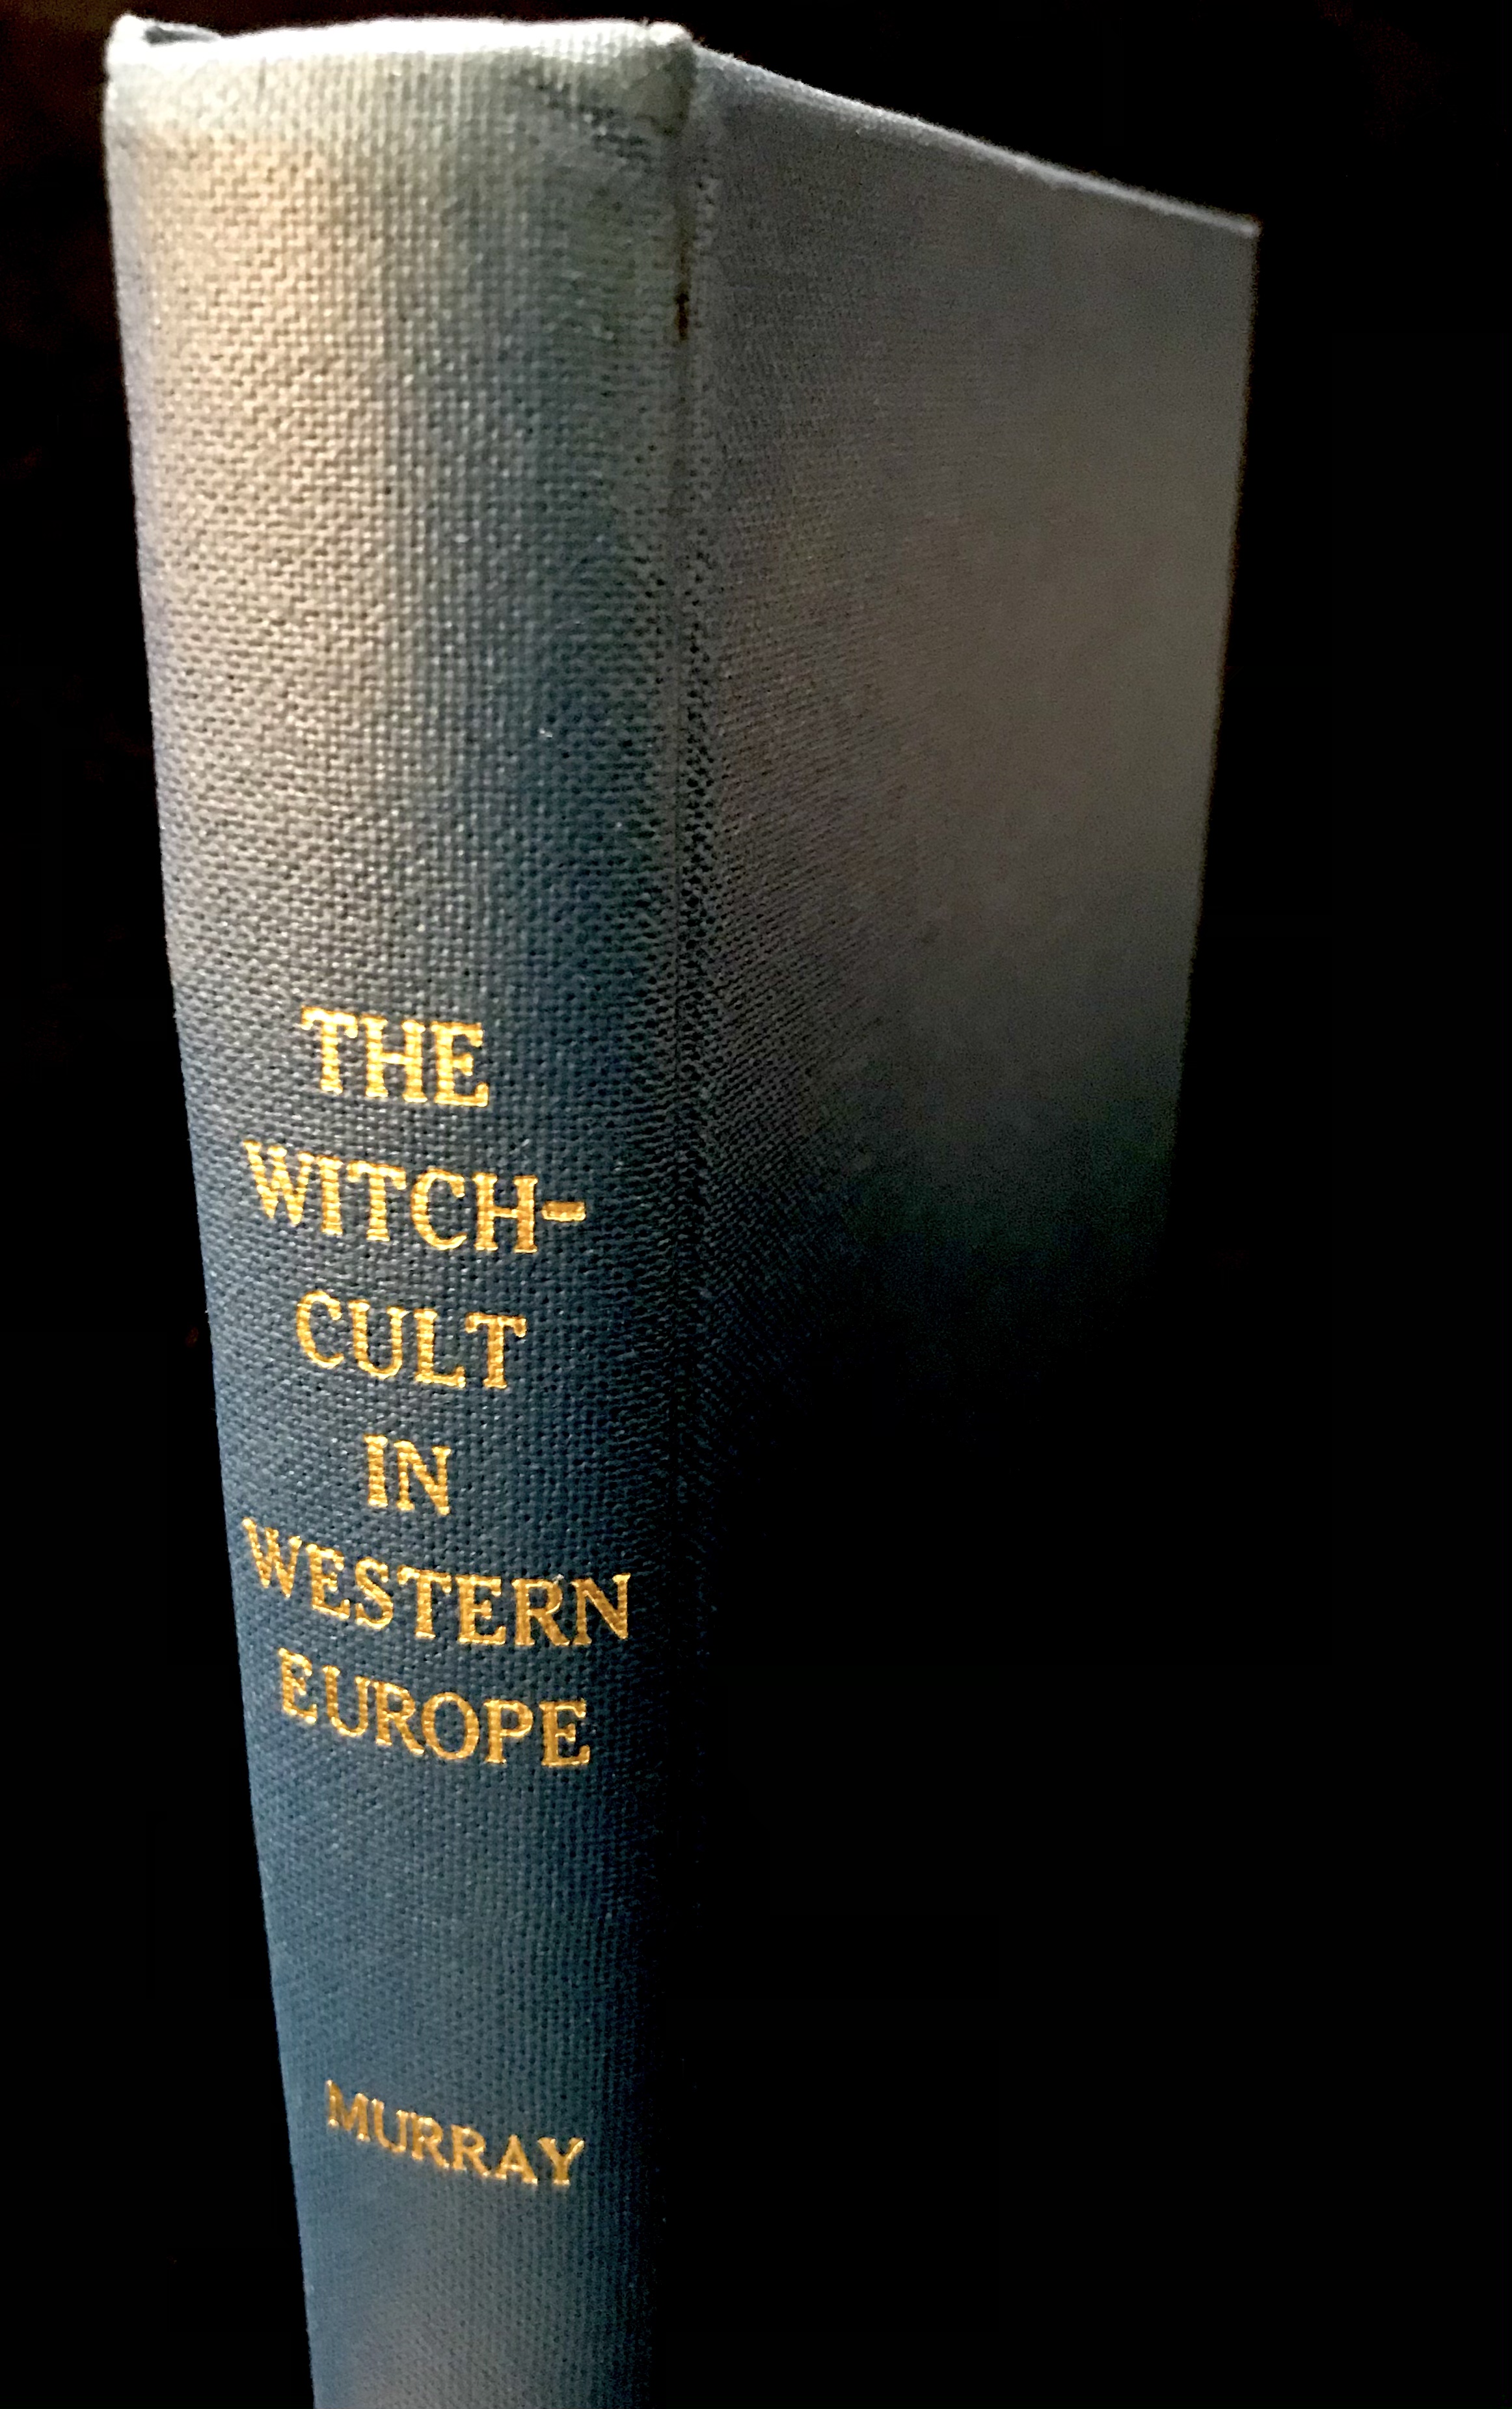 The Witch-Cult in Western Europe by Margaret A. Murray